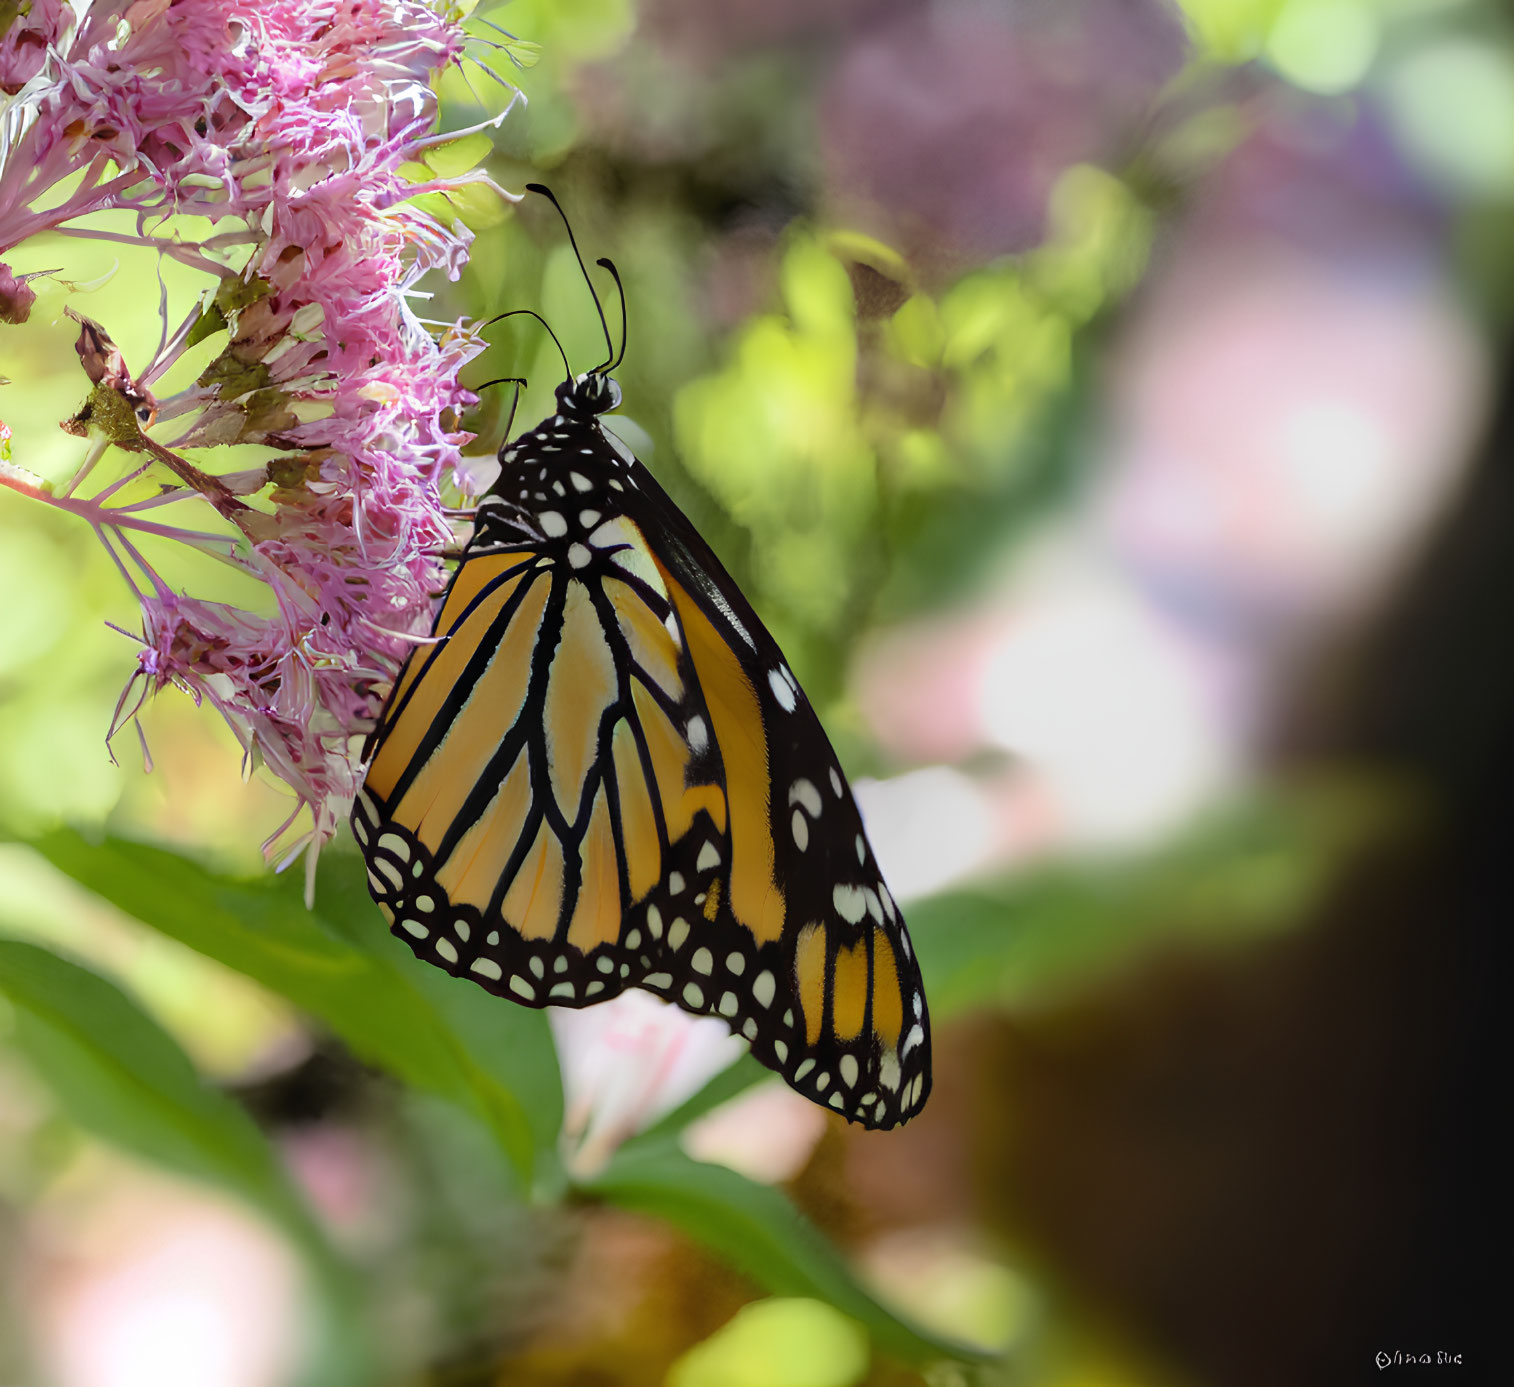 Monarch butterfly perched on pink flowers with orange and black wings